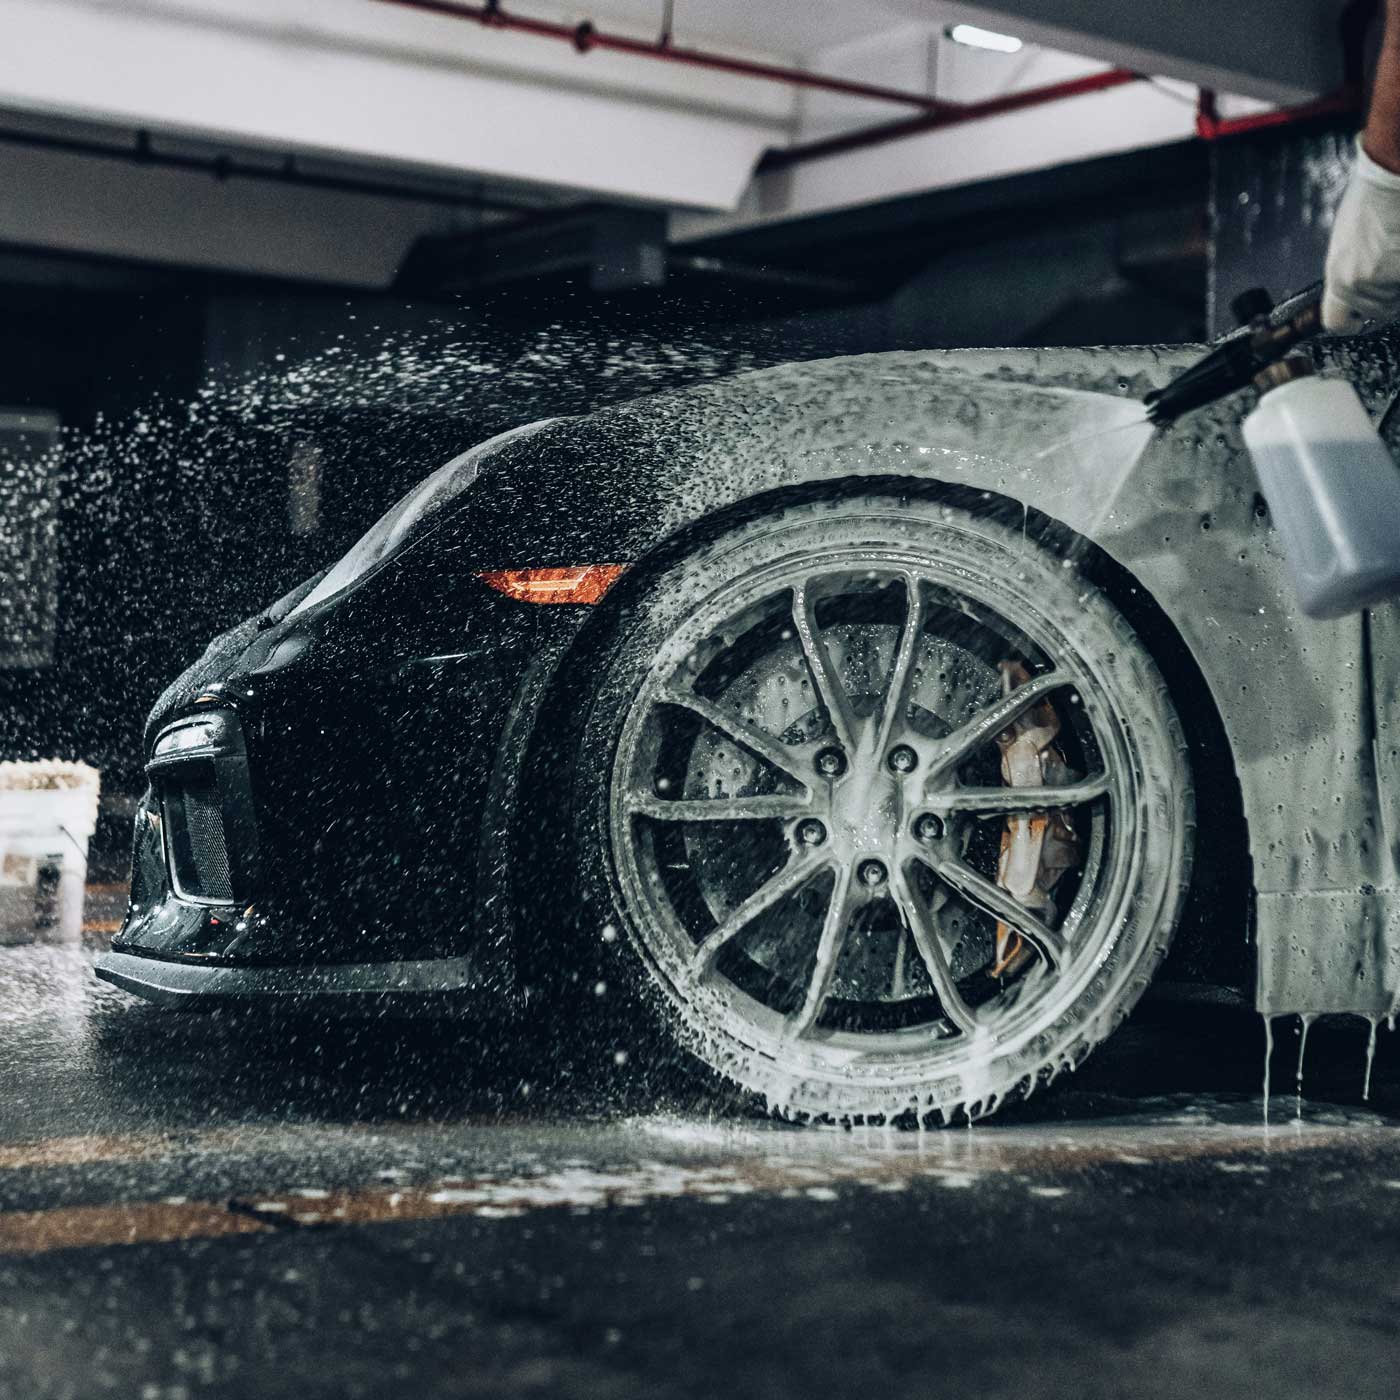 What Car Soap To Use On Ceramic Coating